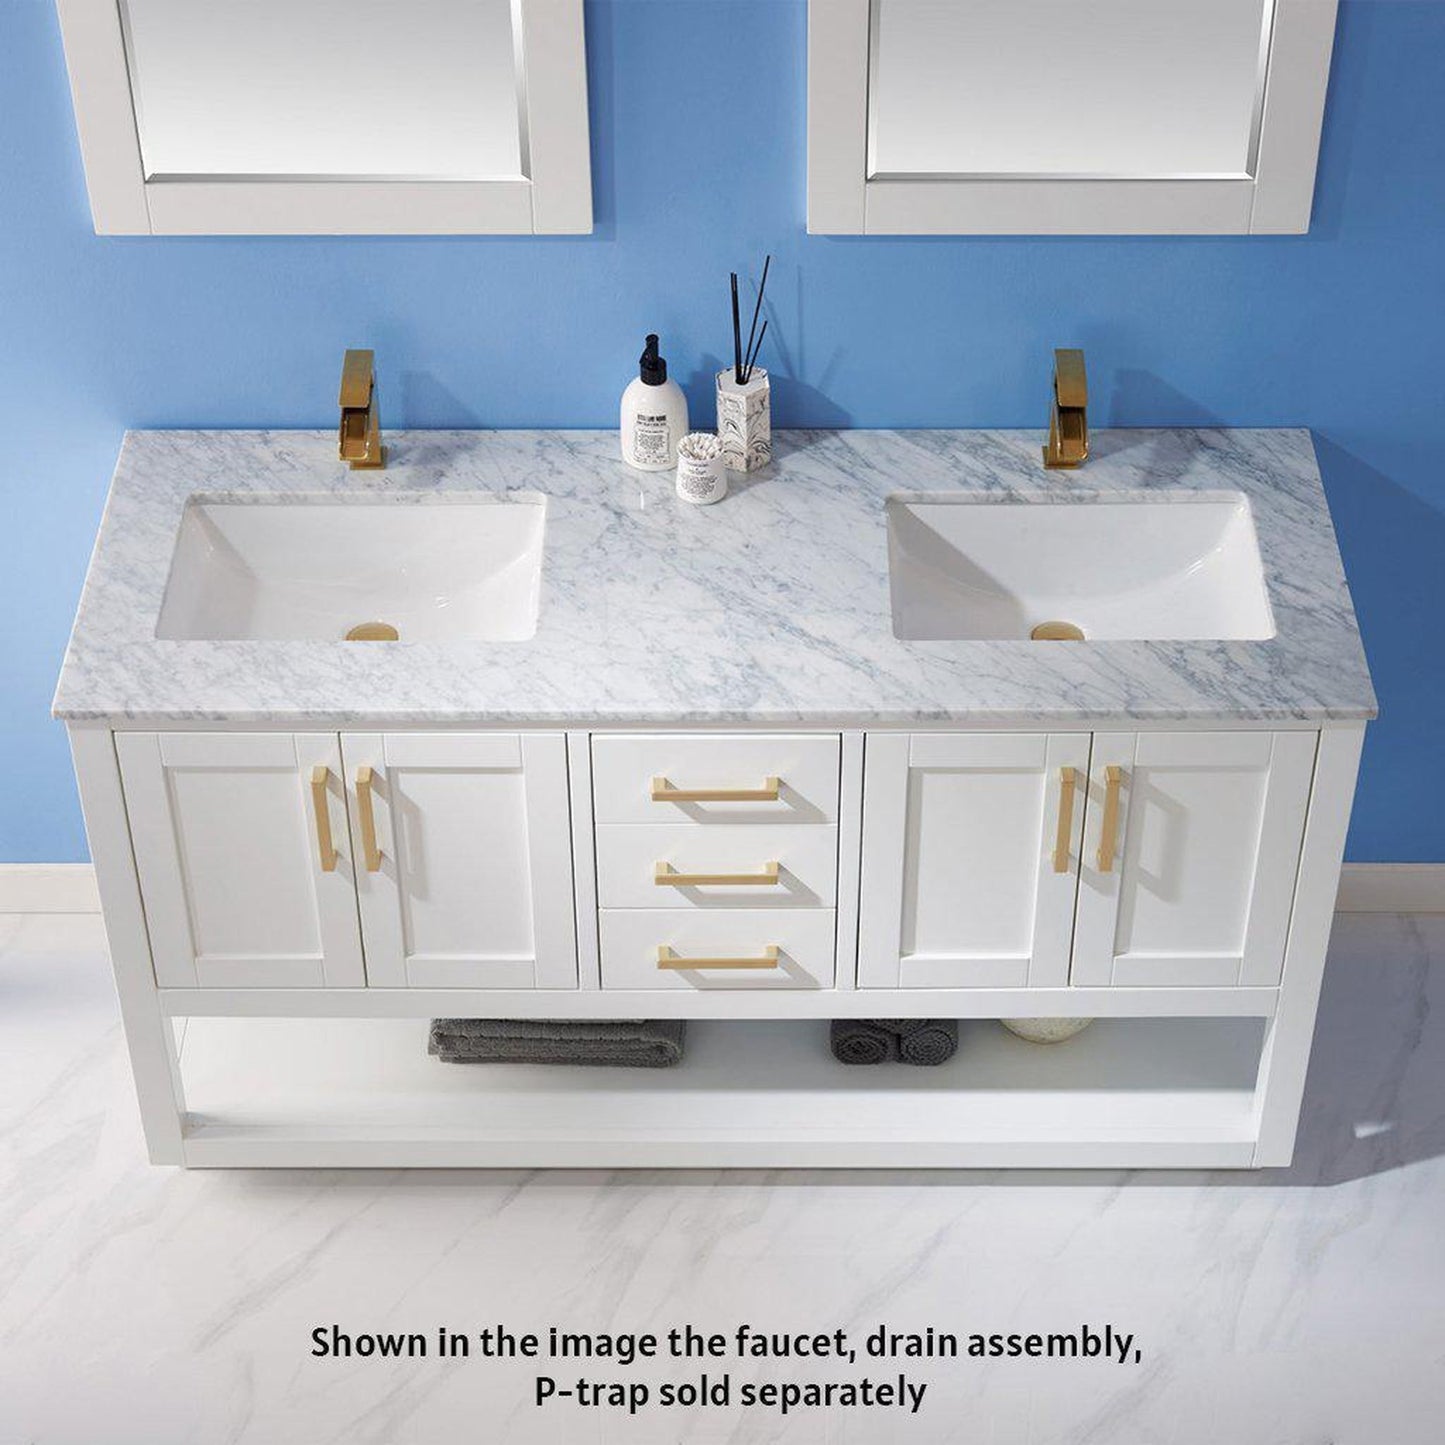 Altair Remi 60" Double White Freestanding Bathroom Vanity Set With Mirror, Natural Carrara White Marble Top, Two Rectangular Undermount Ceramic Sinks, and Overflow